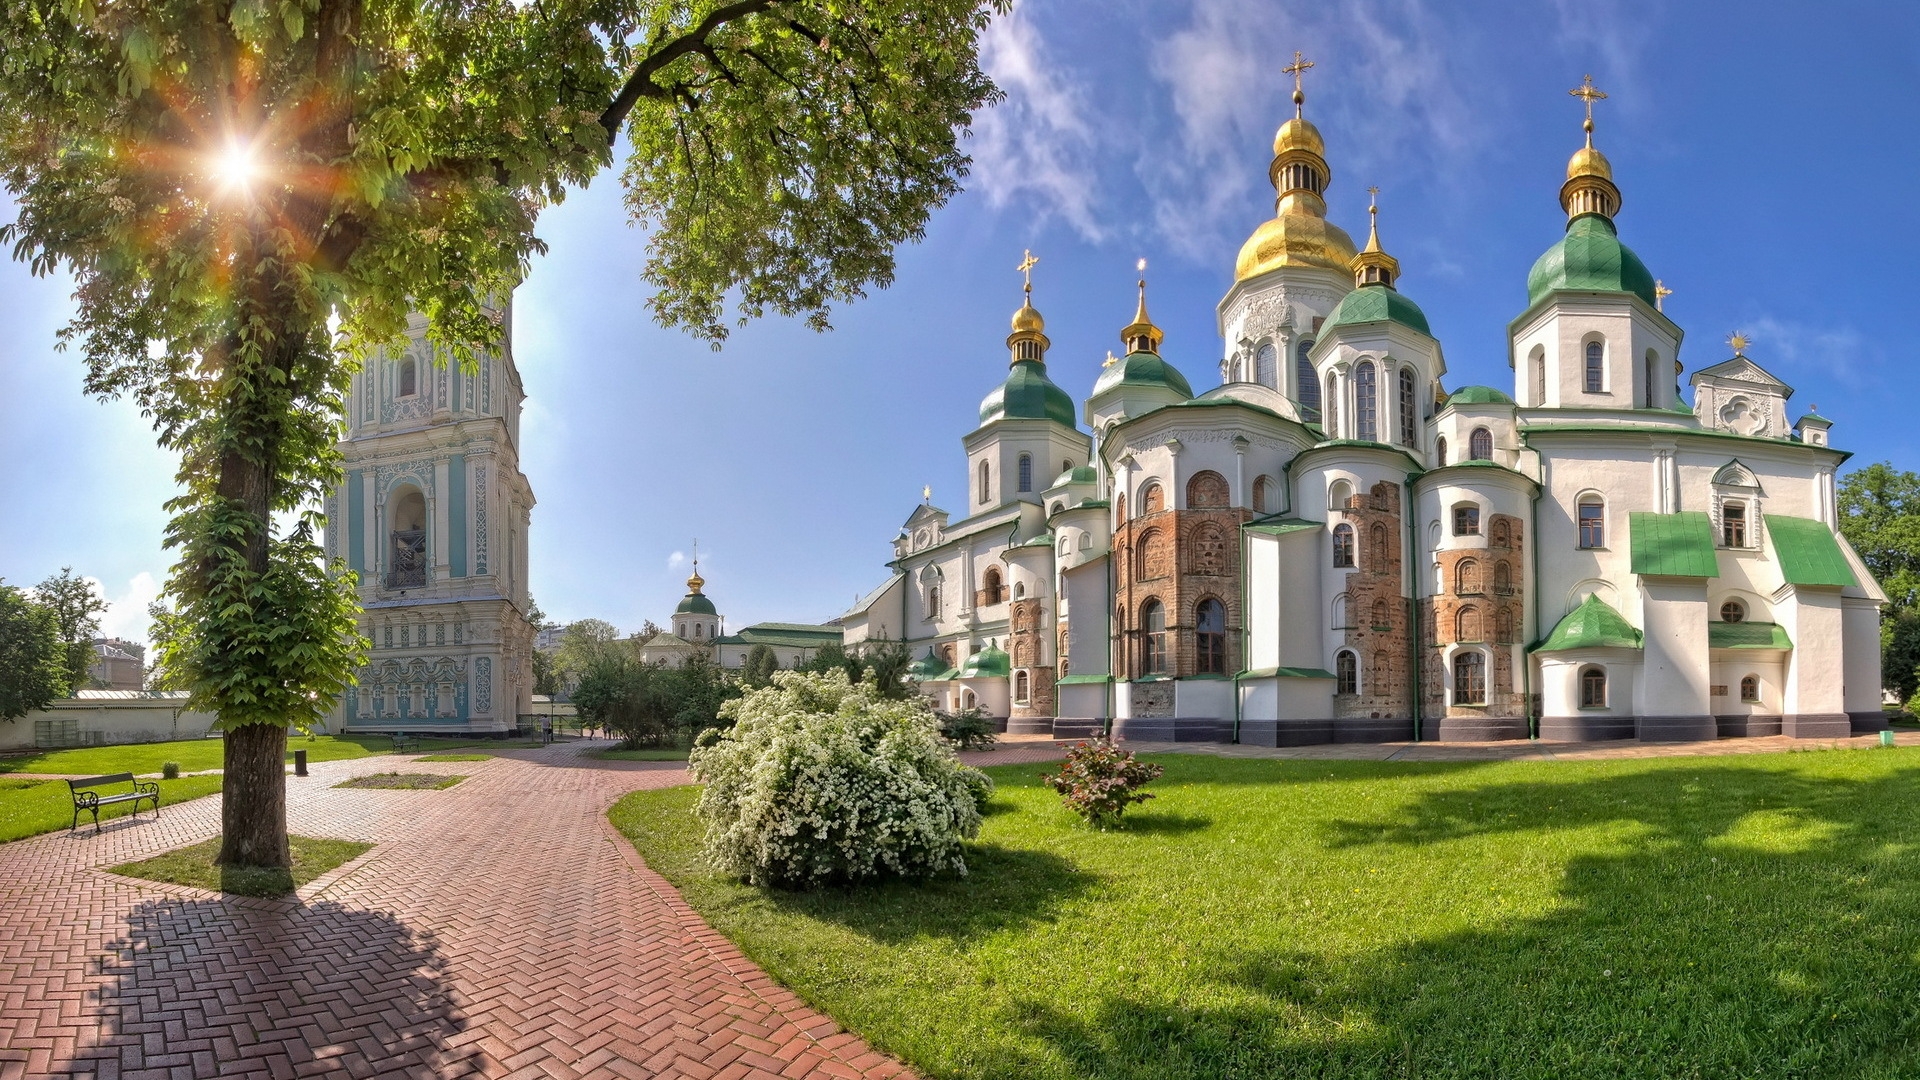 A Response to Fr Alexander Lucie-Smith’s Article on ‘Orthodox Schism’ in Ukraine